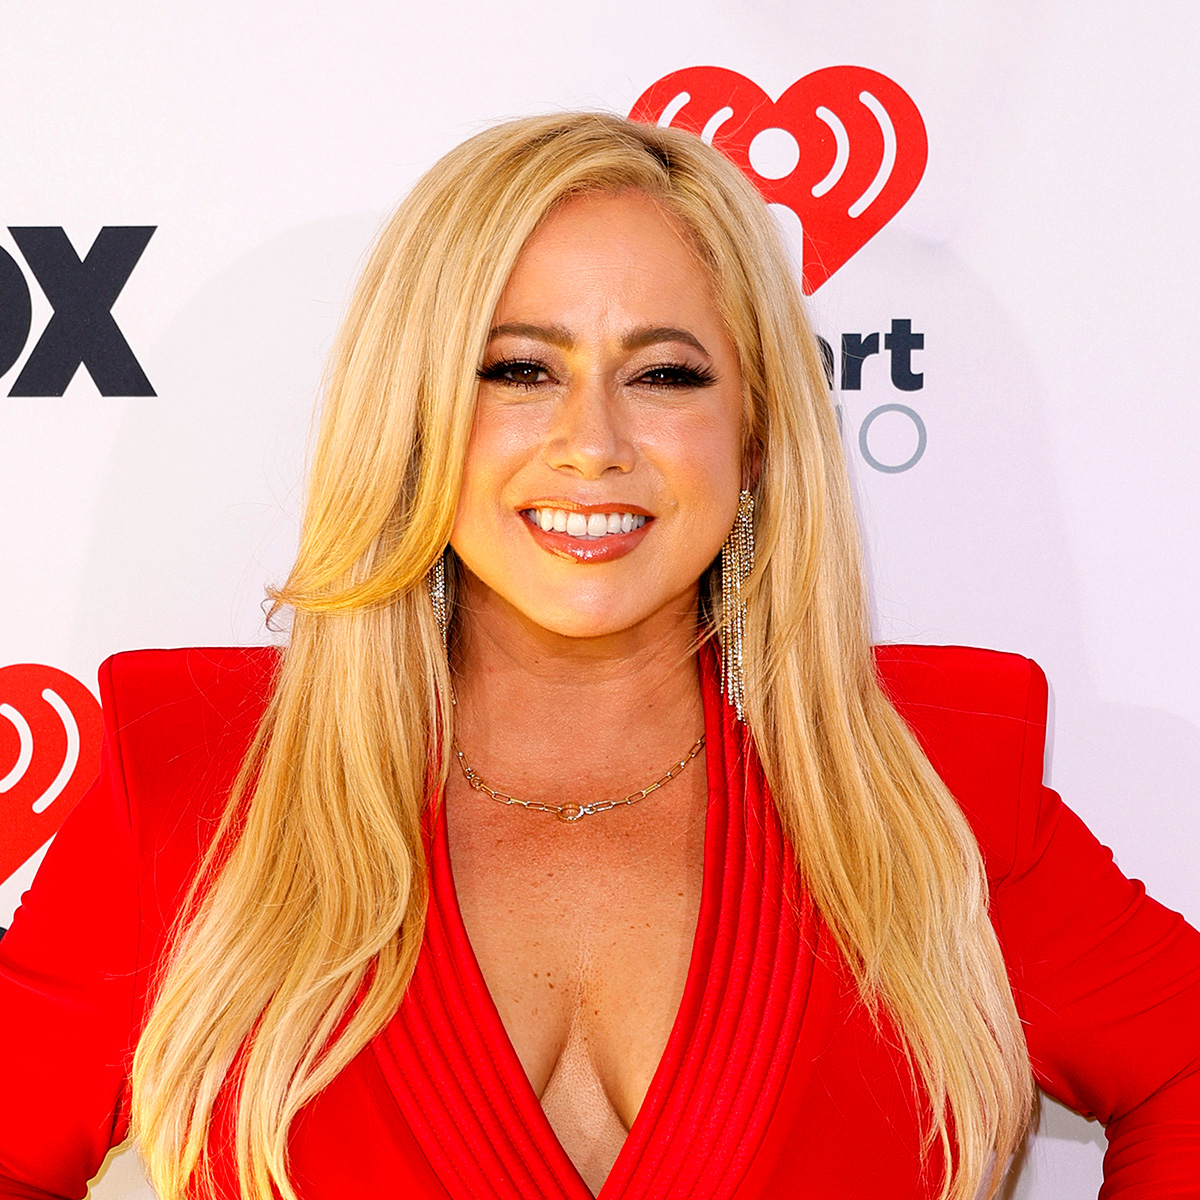 Cheetah Girls’ Sabrina Bryan Weighs in on Possibility of Another Movie